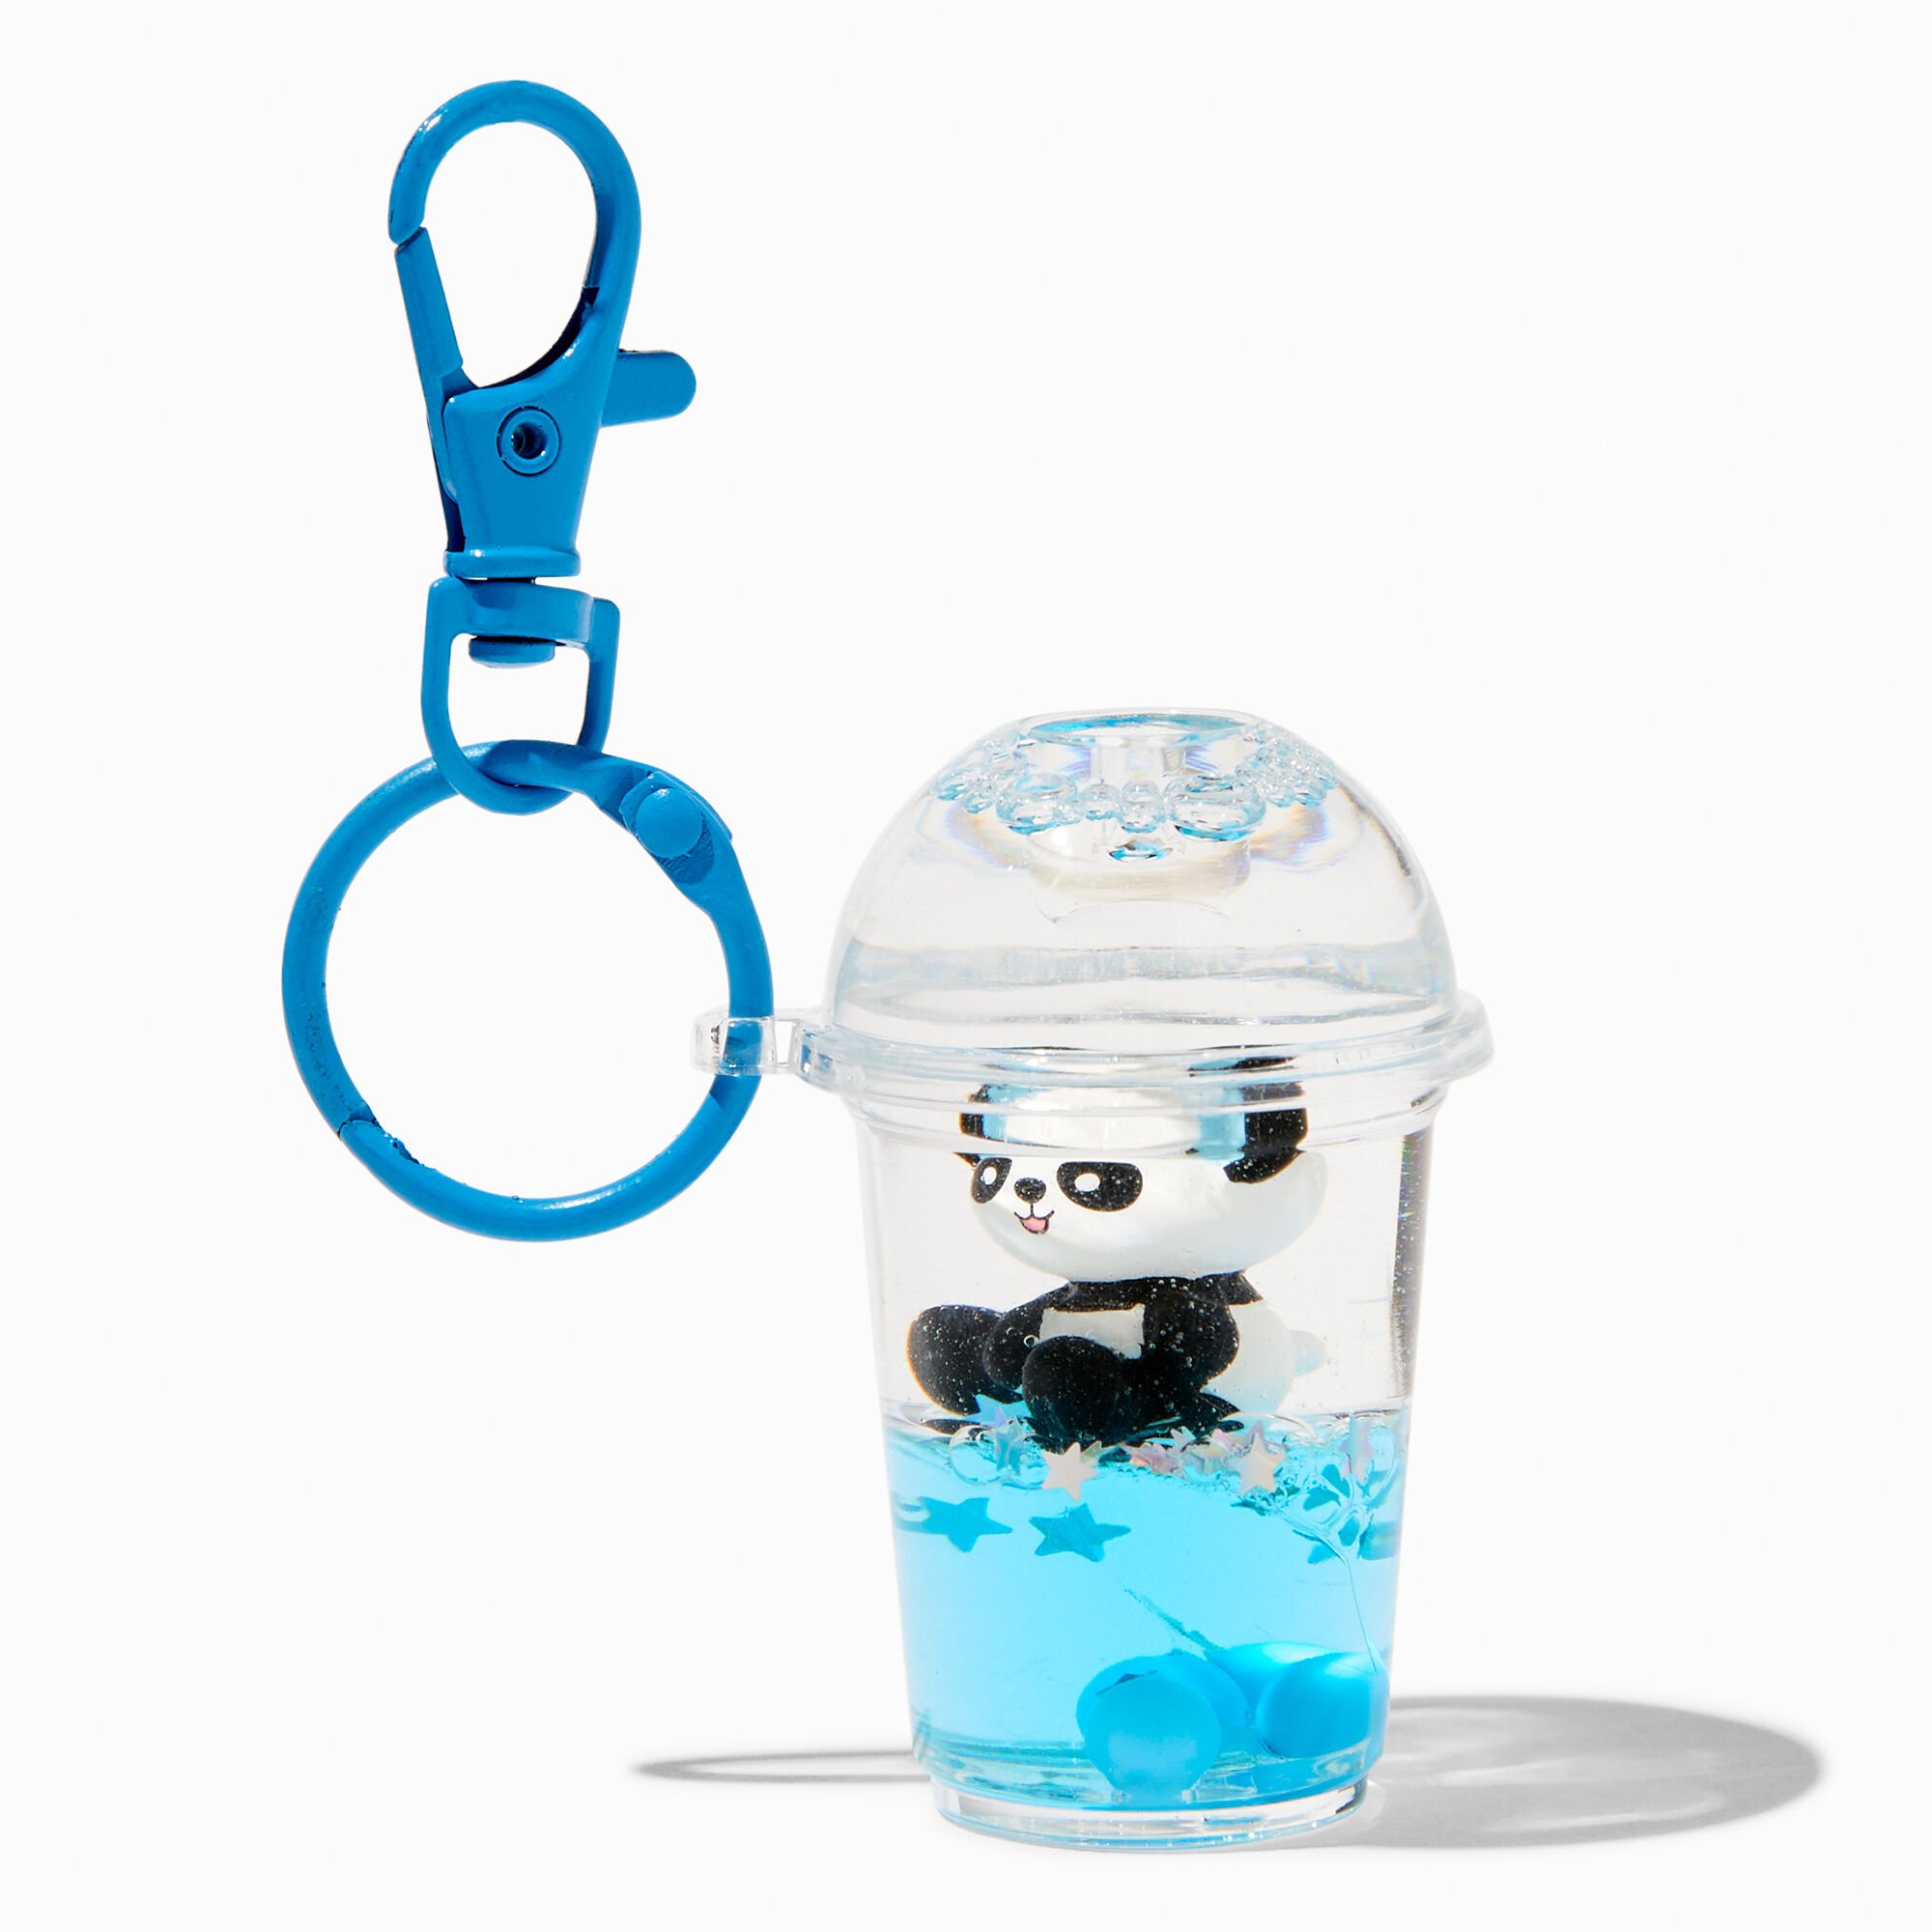 View Claires Panda Tea WaterFilled Glitter Keyring information